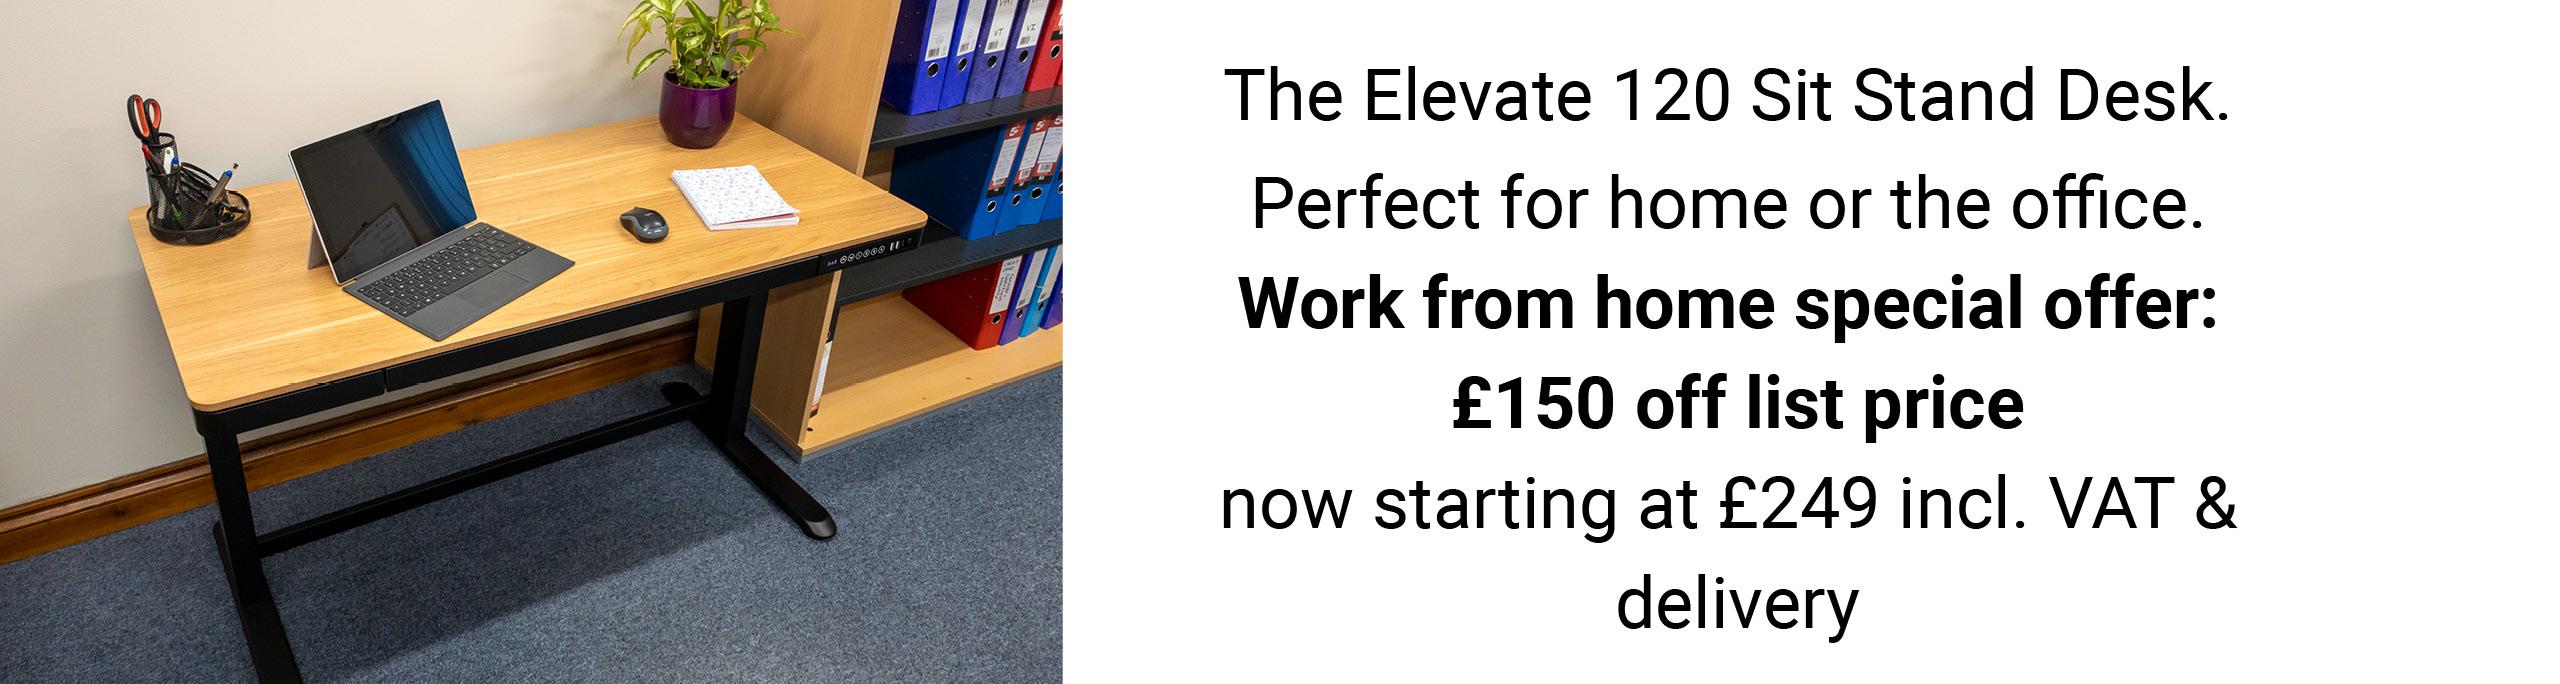 The Elevate 120 Sit Stand Desk. Perfect for home or the office. Work from home special offer. £250 off list price.